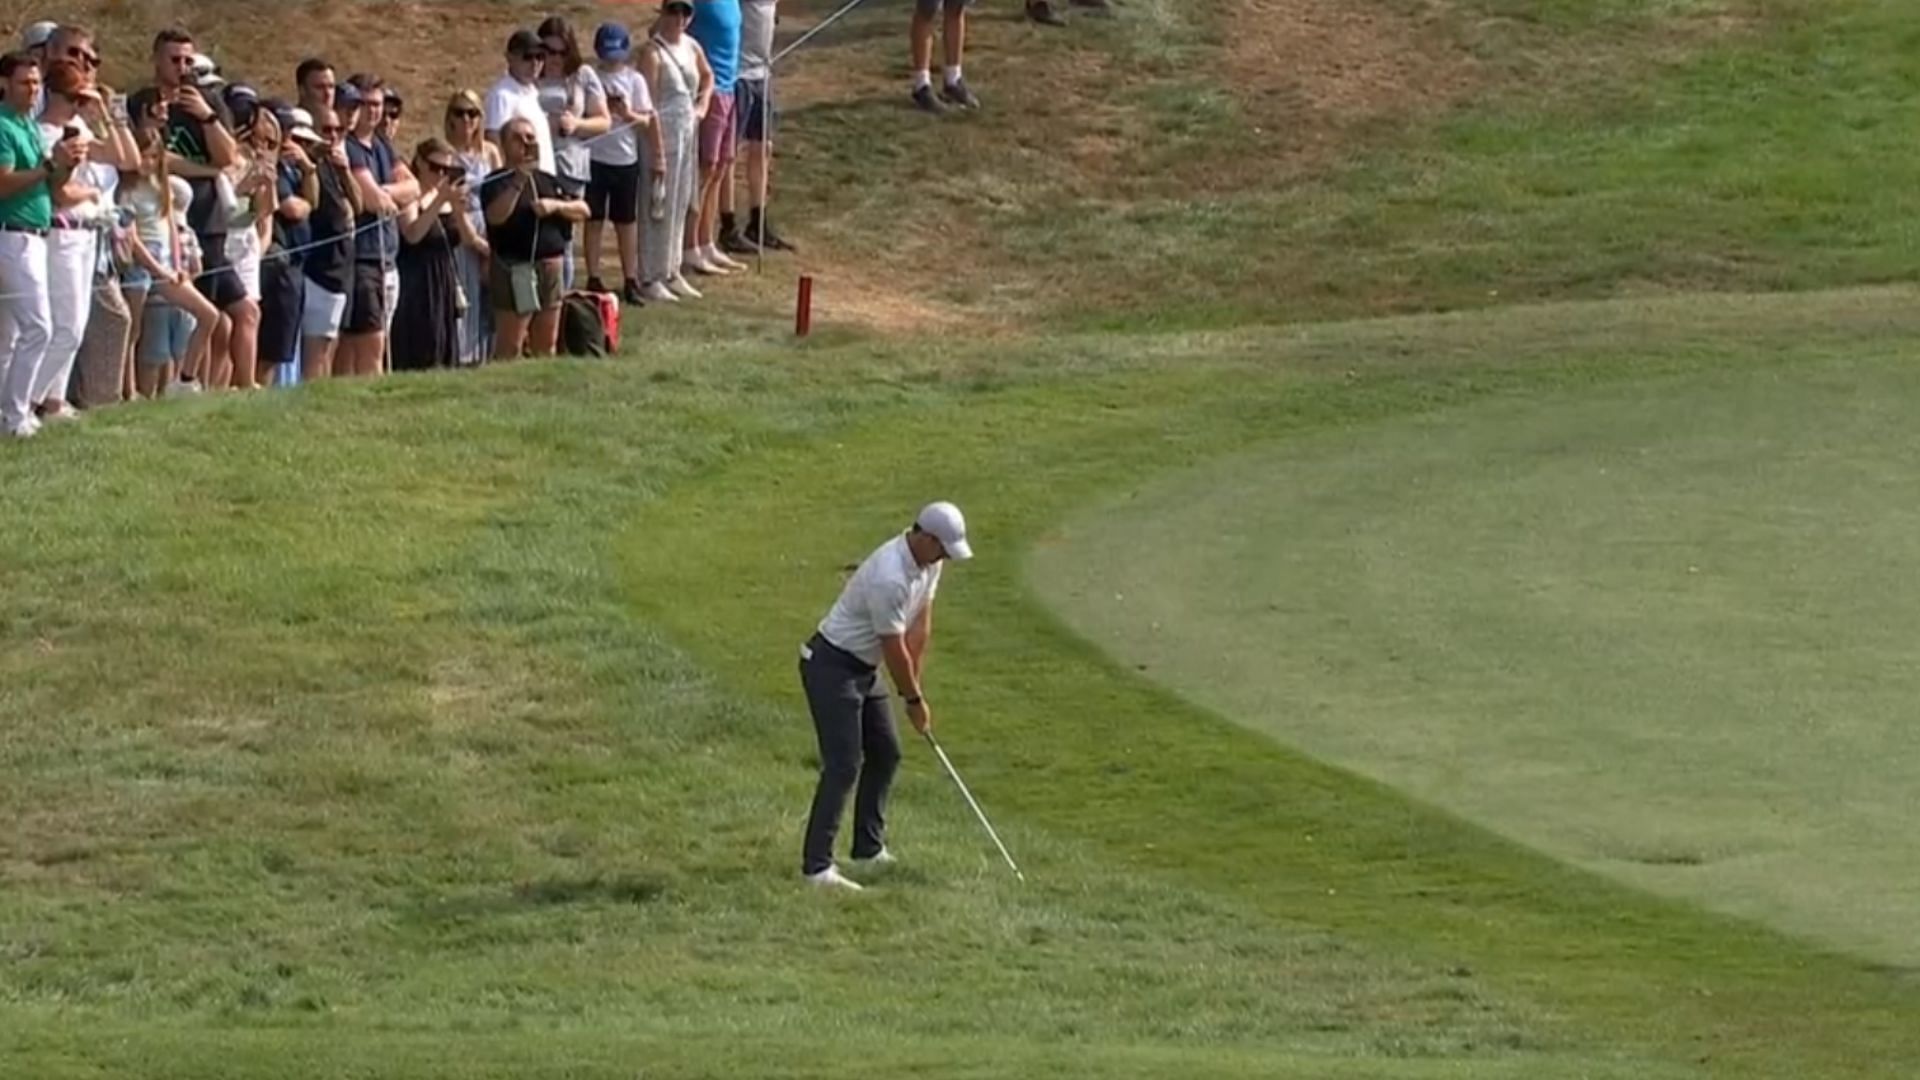 Rory McIlroy lucky shot in the BMW PGA Championship (Image via DP World Tour)